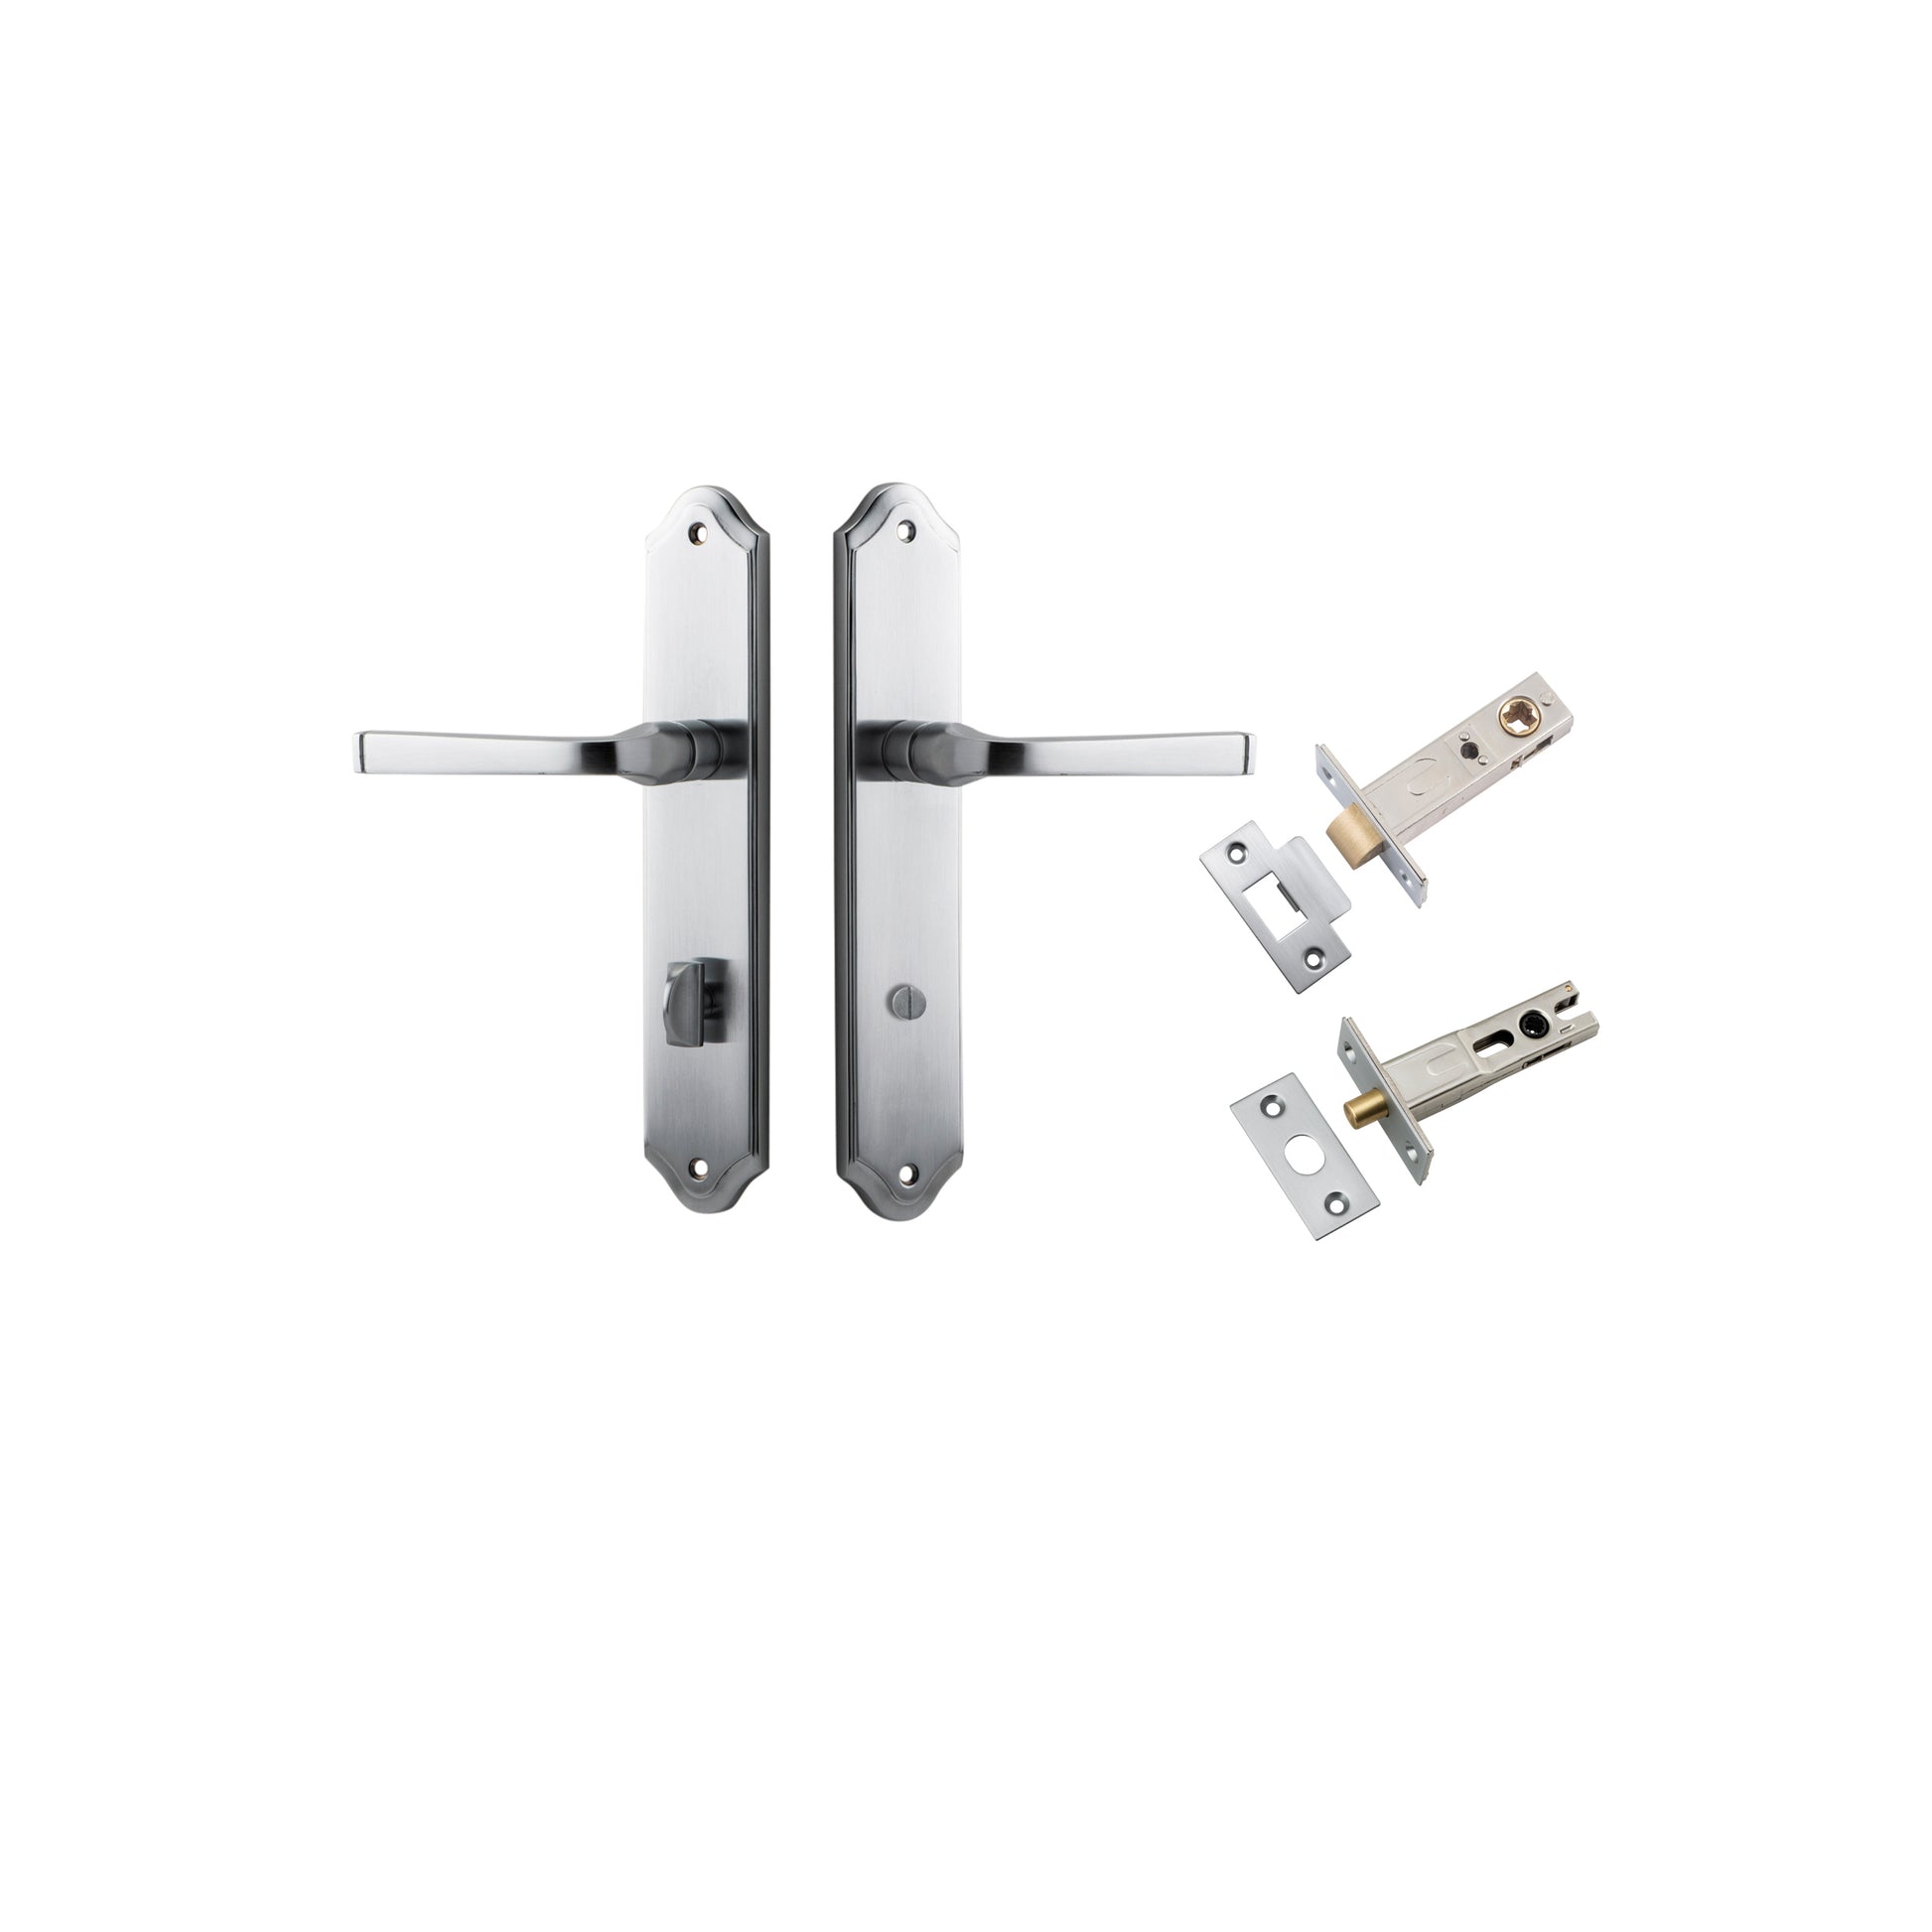 Door Lever Annecy Shouldered Privacy Brushed Chrome CTC85mm H240xW50xP65mm Inbuilt Privacy Kit, Tube Latch Split Cam 'T' Striker Brushed Chrome Backset 60mm, Privacy Bolt Round Bolt Brushed Chrome Backset 60mm in Brushed Chrome